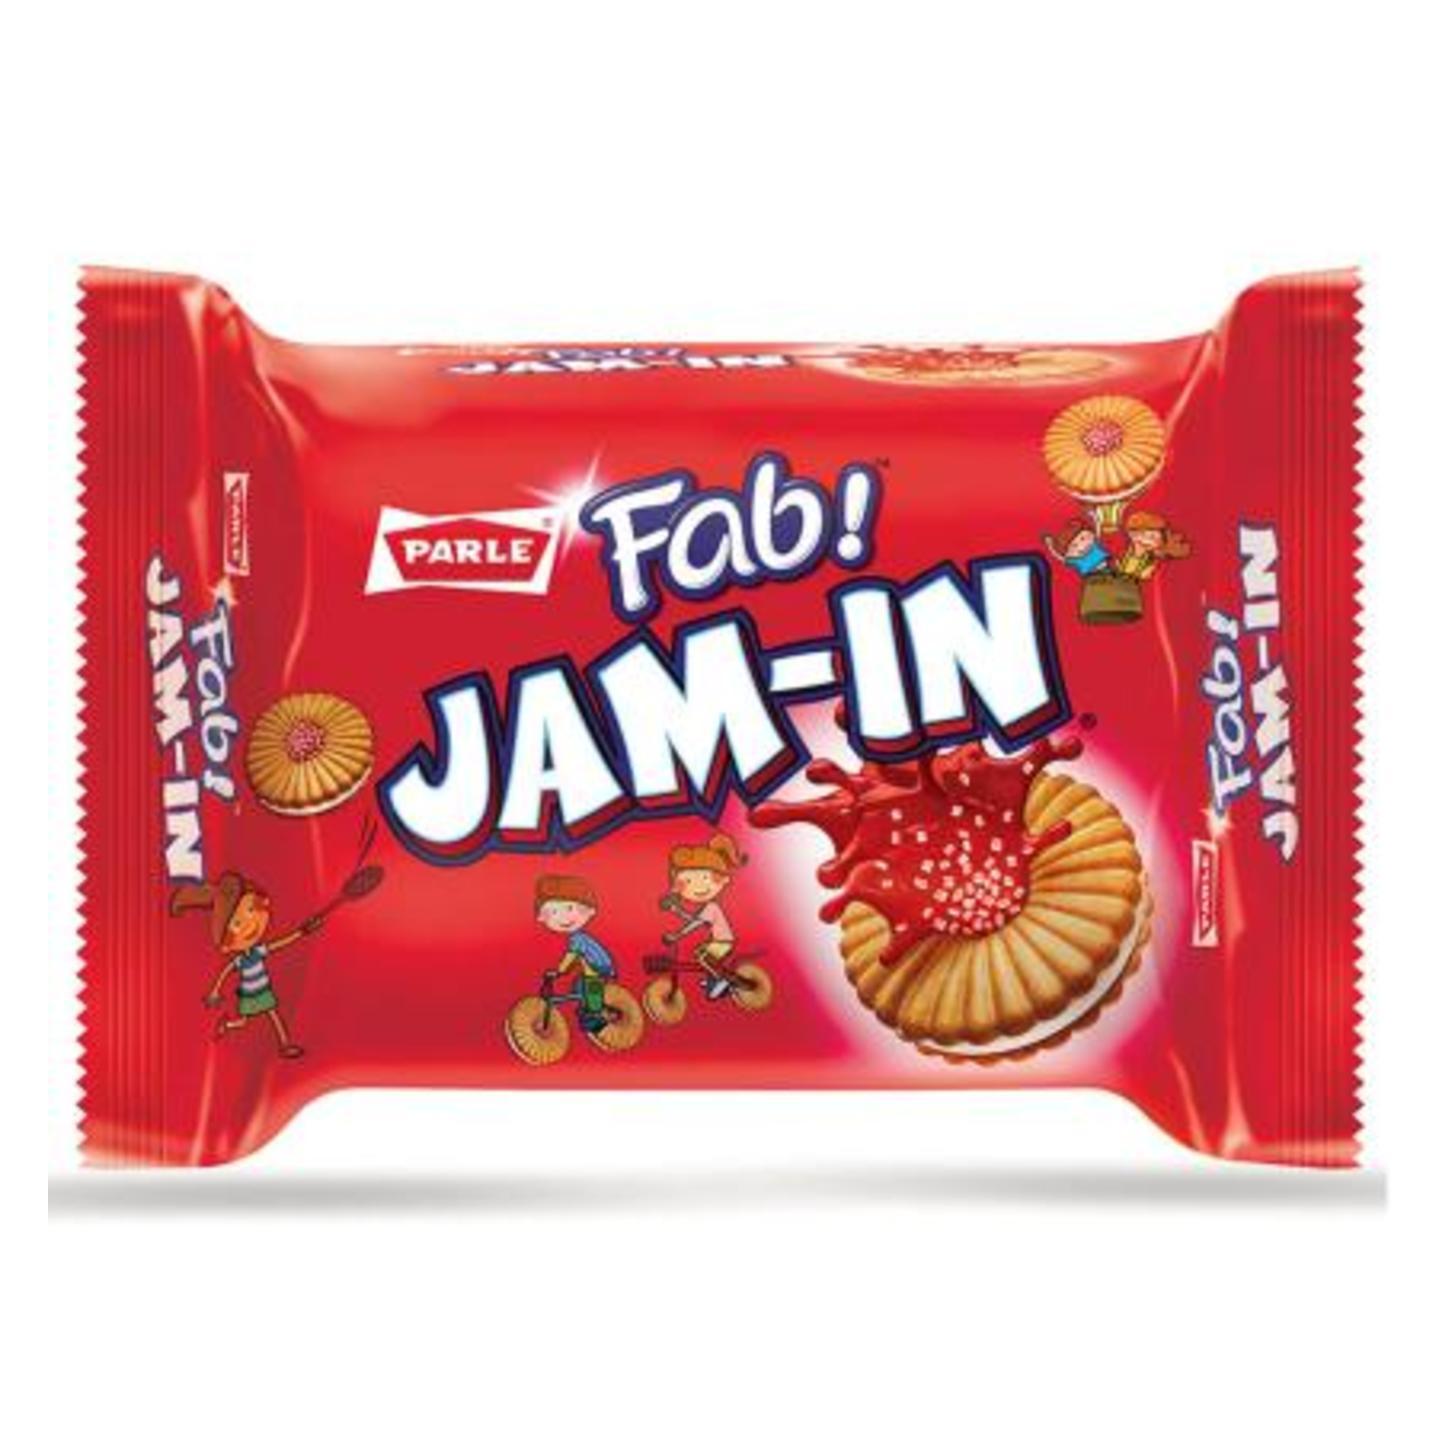 Parle Fab Jam-In Cream Biscuits 150 g